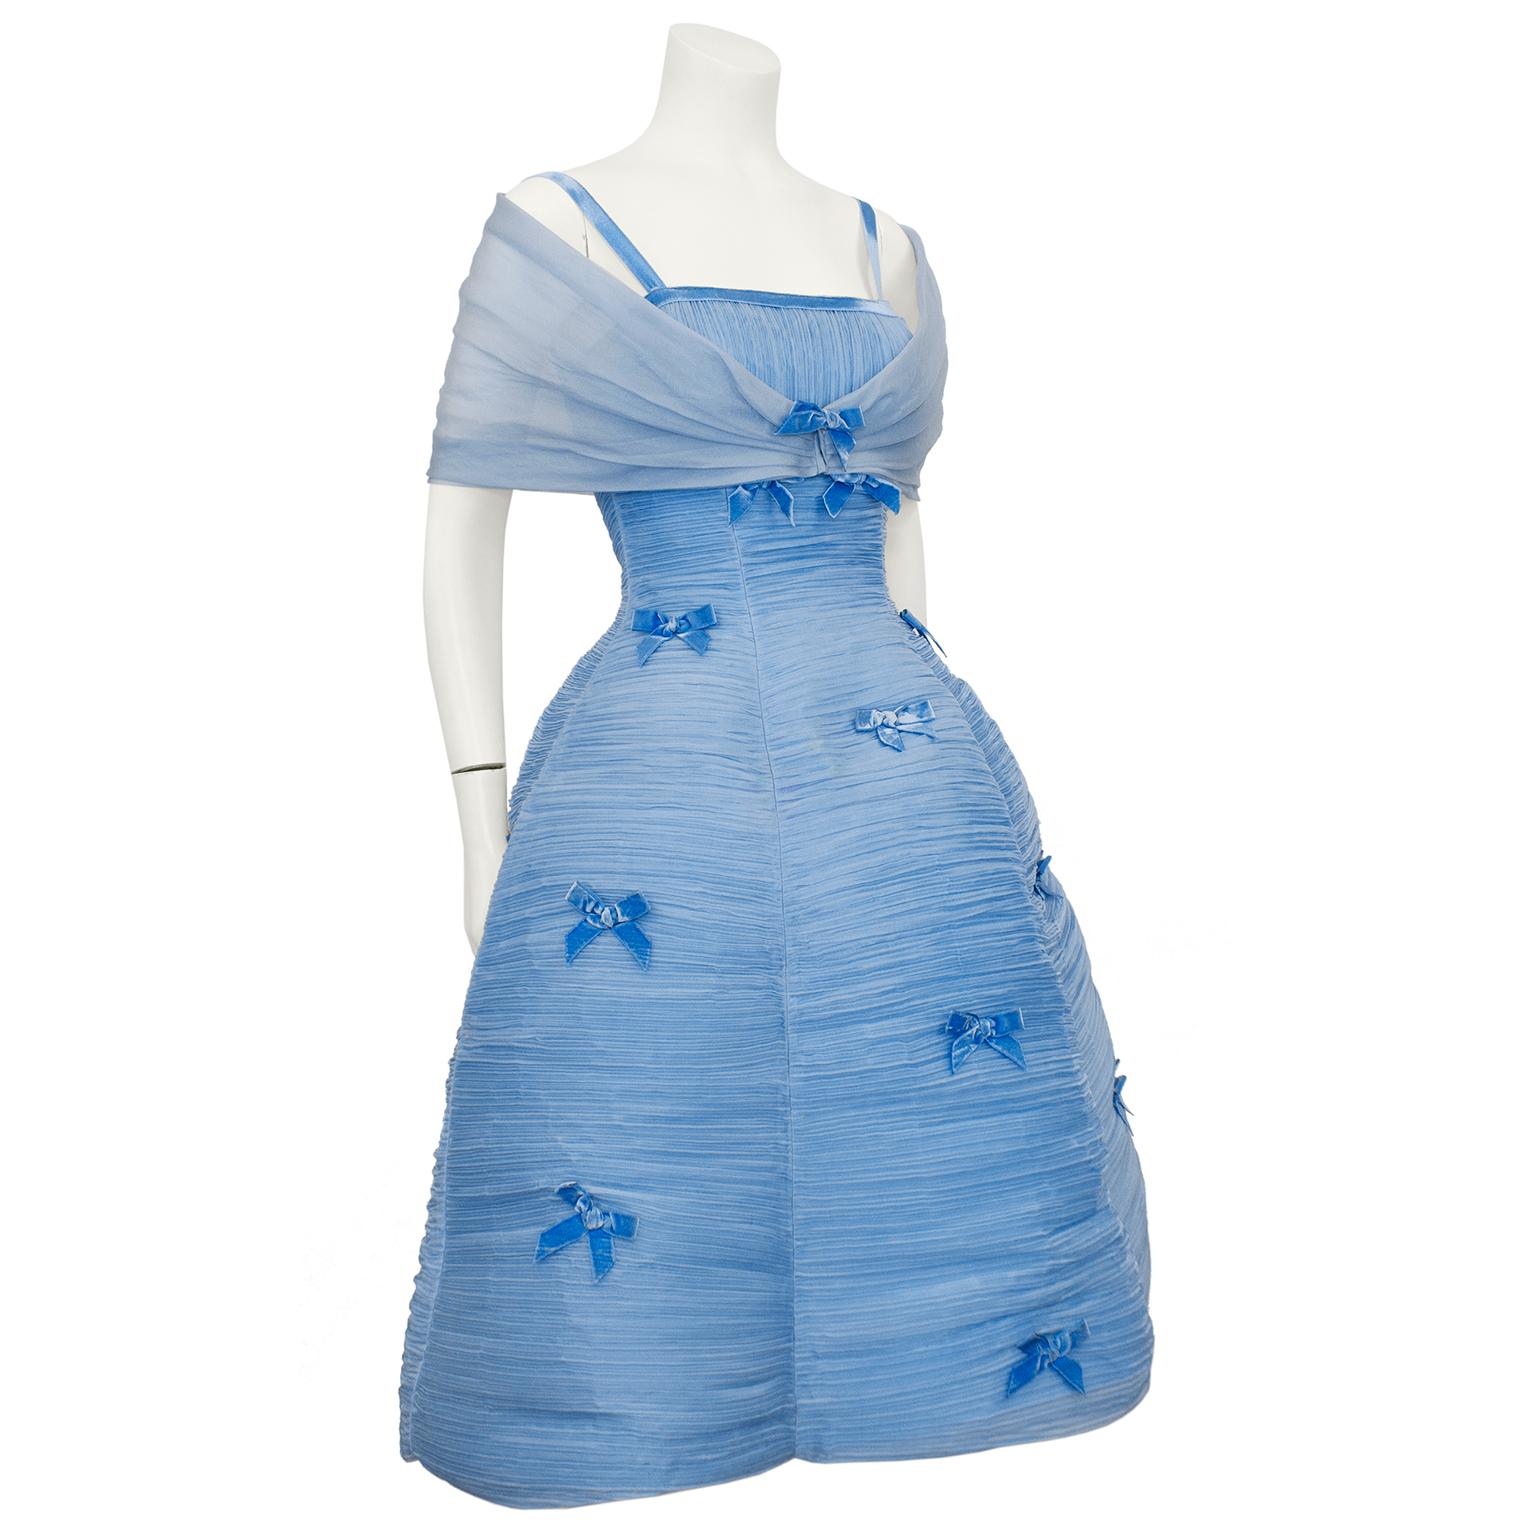 This 1960's baby blue pleated chiffon and velvet fit and flare dress appears to be the work of the Irish couturier Sybil Connelly however there is no longer a label inside. It belonged to a well known Toronto client who had many spectacular designer